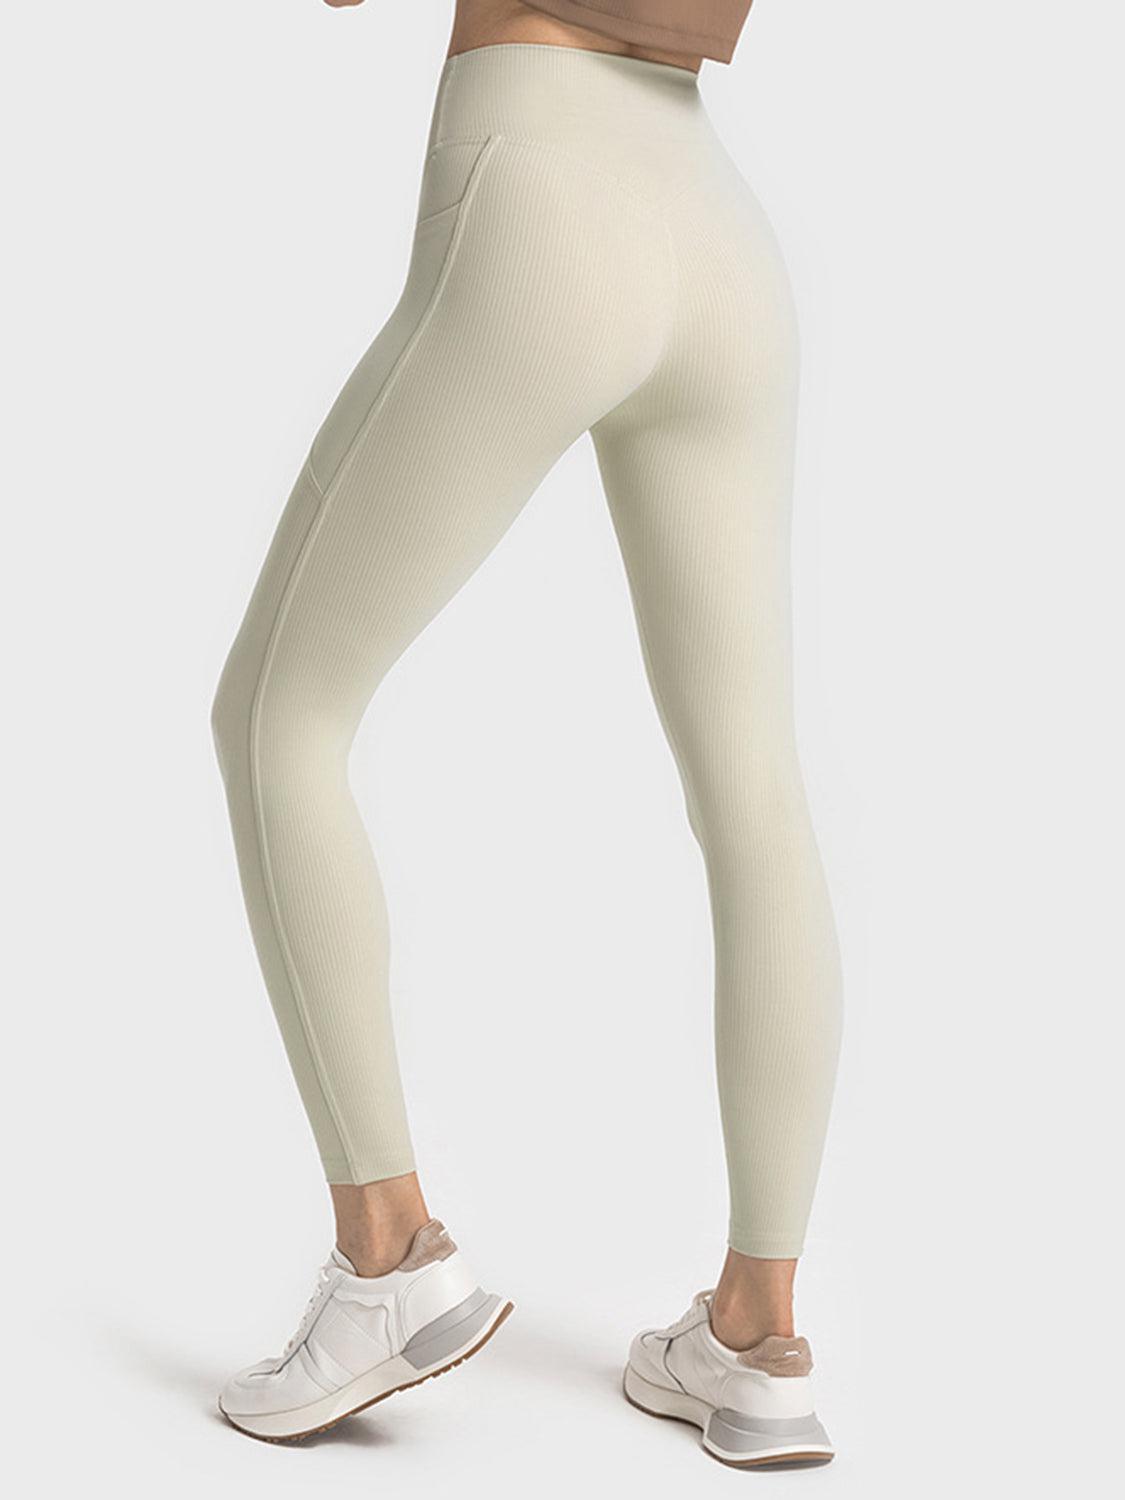 a woman in a tan top and white leggings